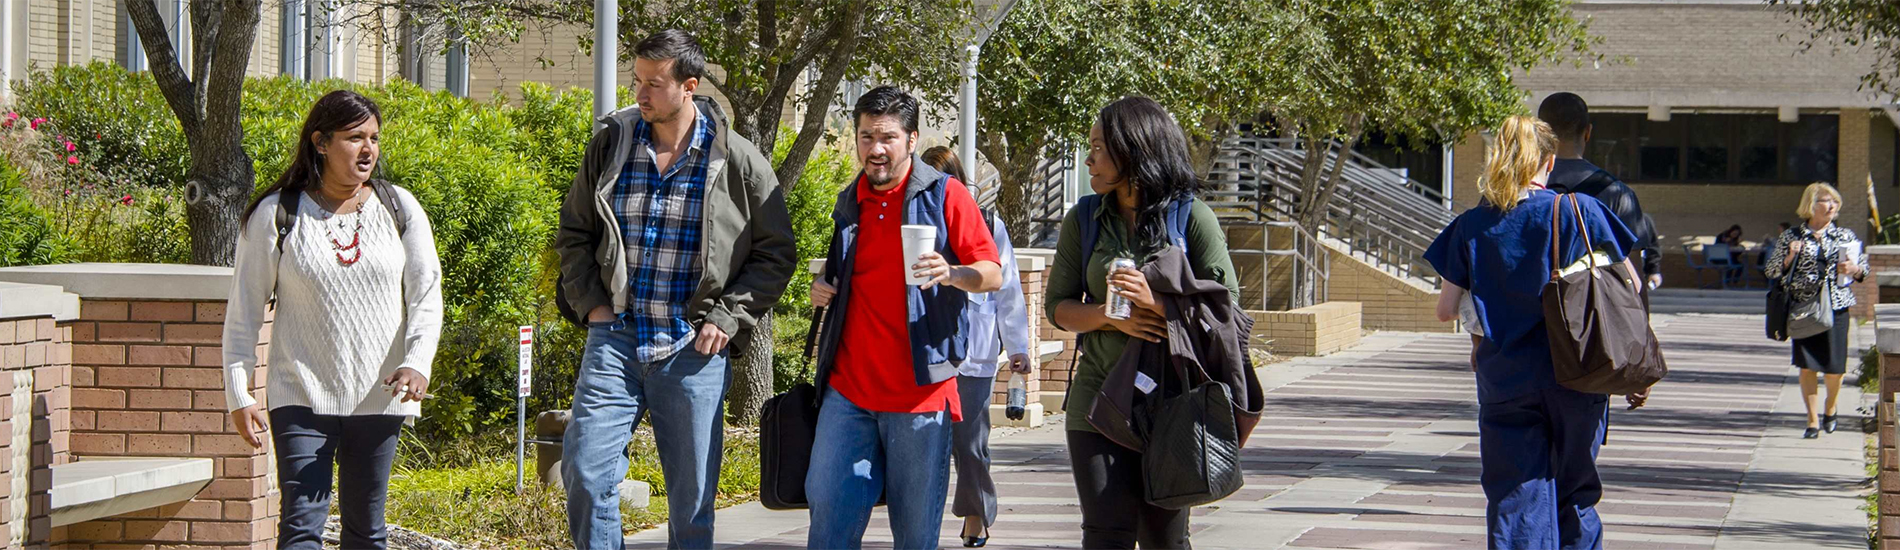 Students Walking on campus